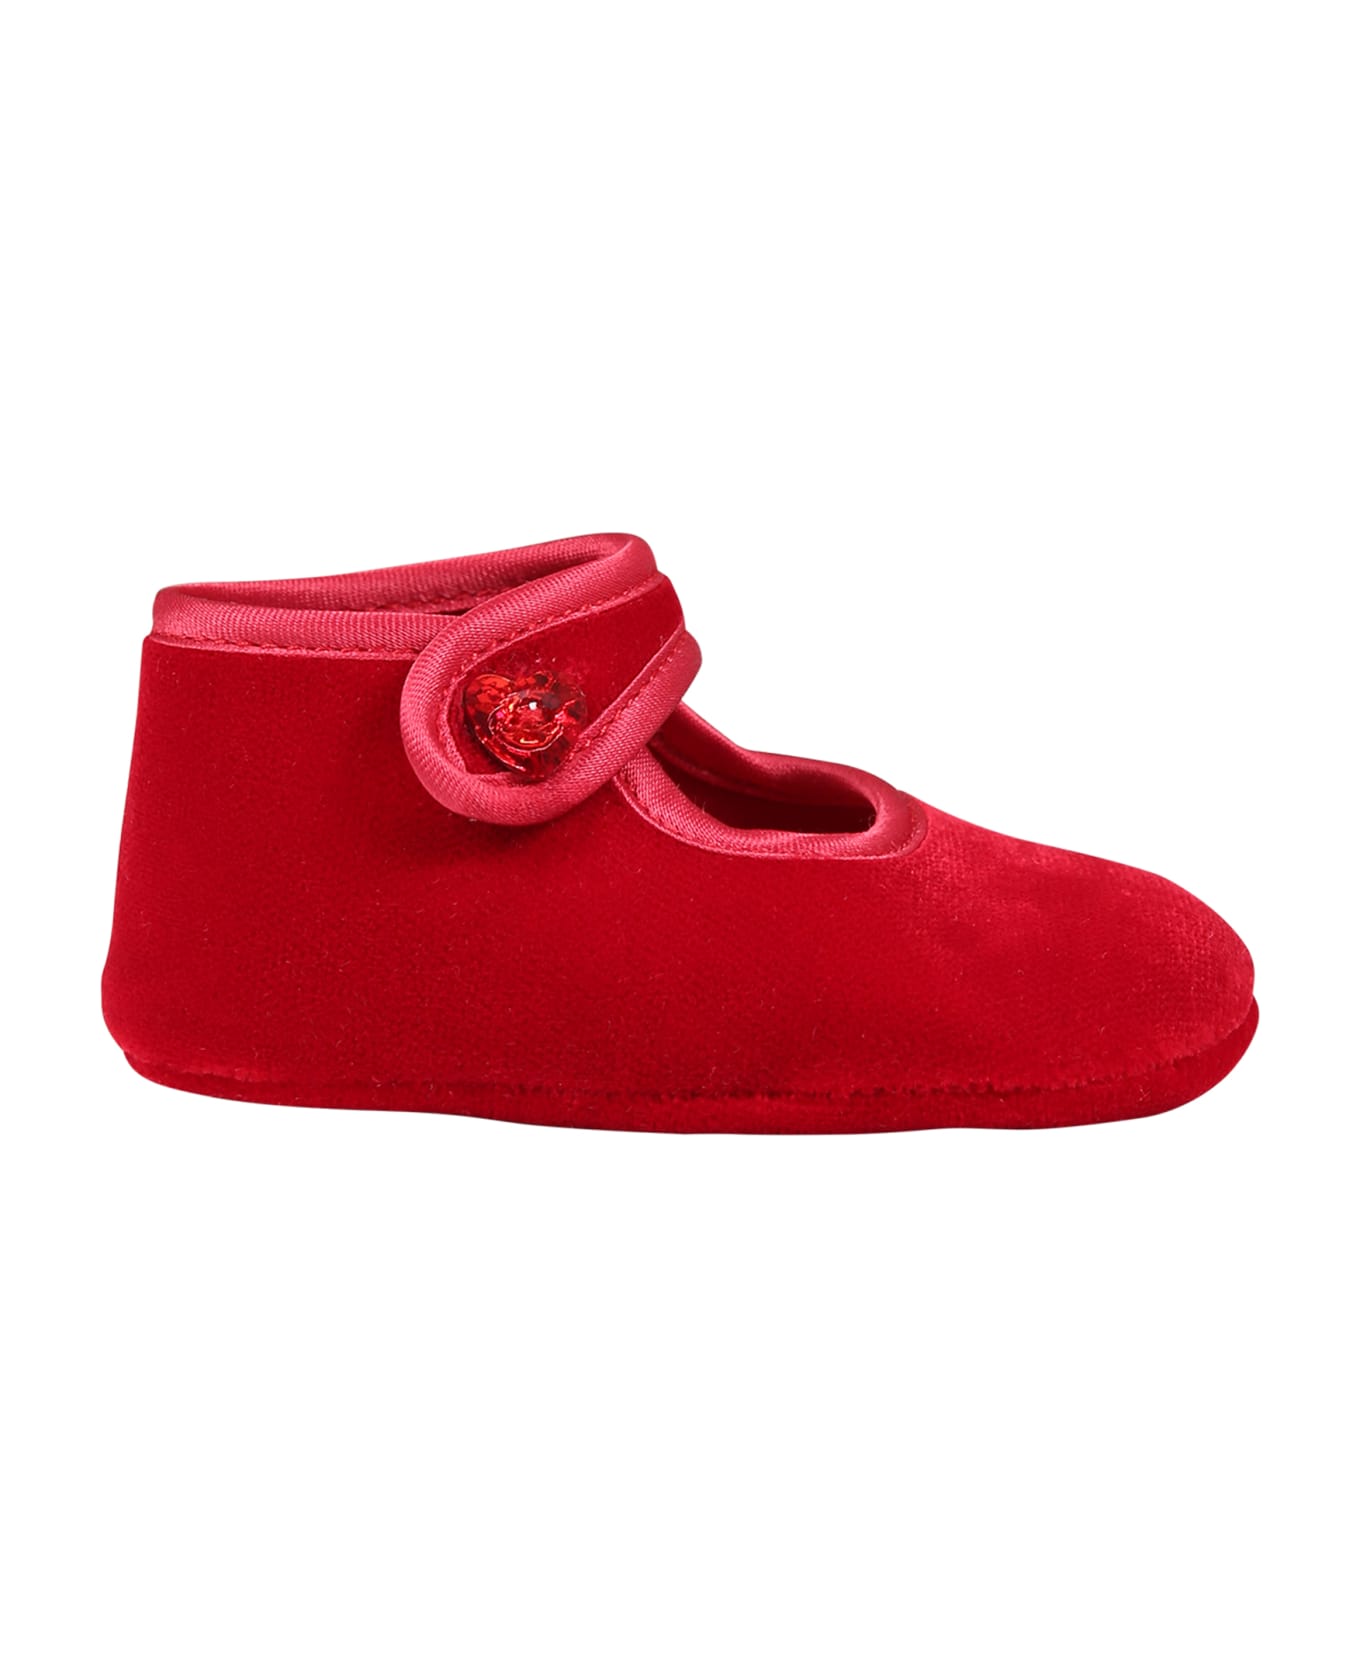 Monnalisa Red Flat Shoes For Baby Girl With Hearts - Red シューズ